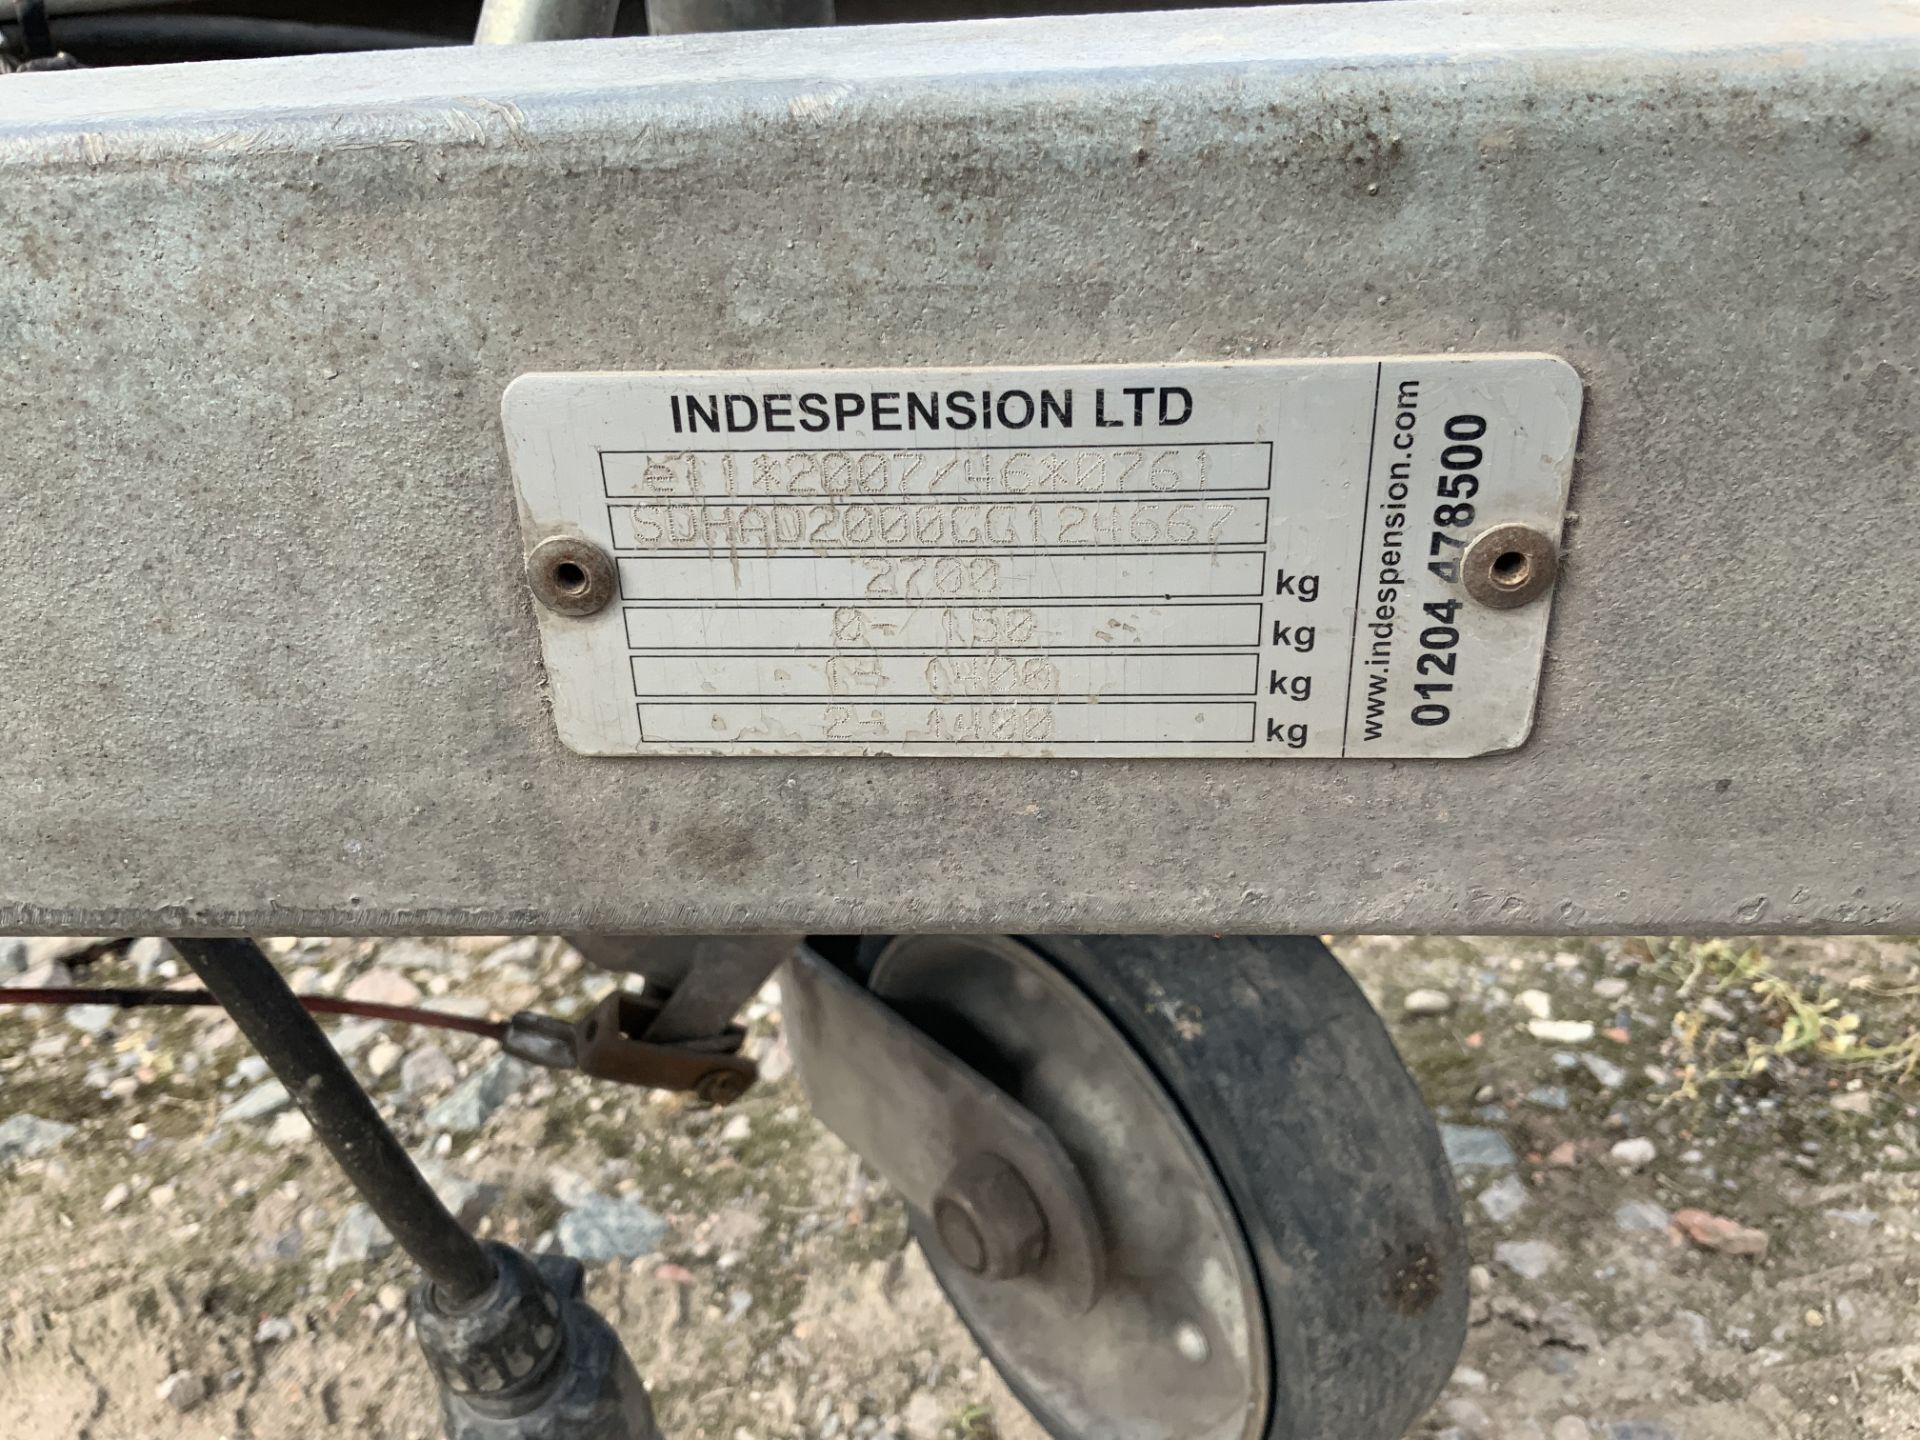 Indespension V20 Twin Axle Plant Trailer, 2,700Kg Capacity, Vin No.GG124667 (2016) - (Located in - Image 5 of 8